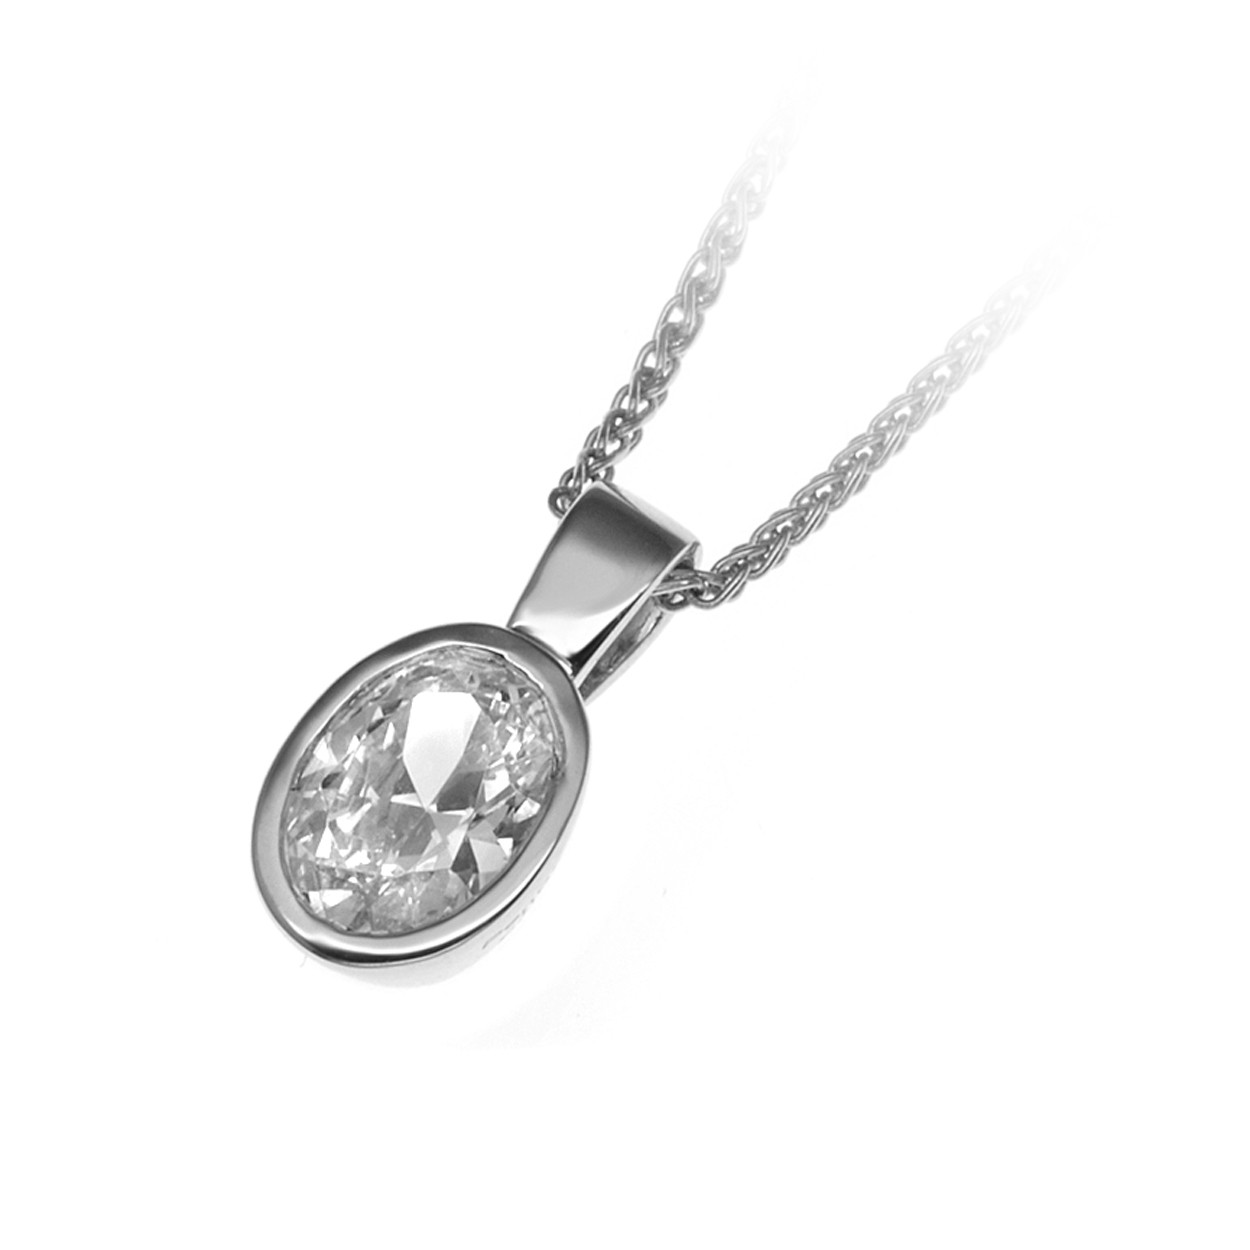 NECKLACES AND PENDANTS